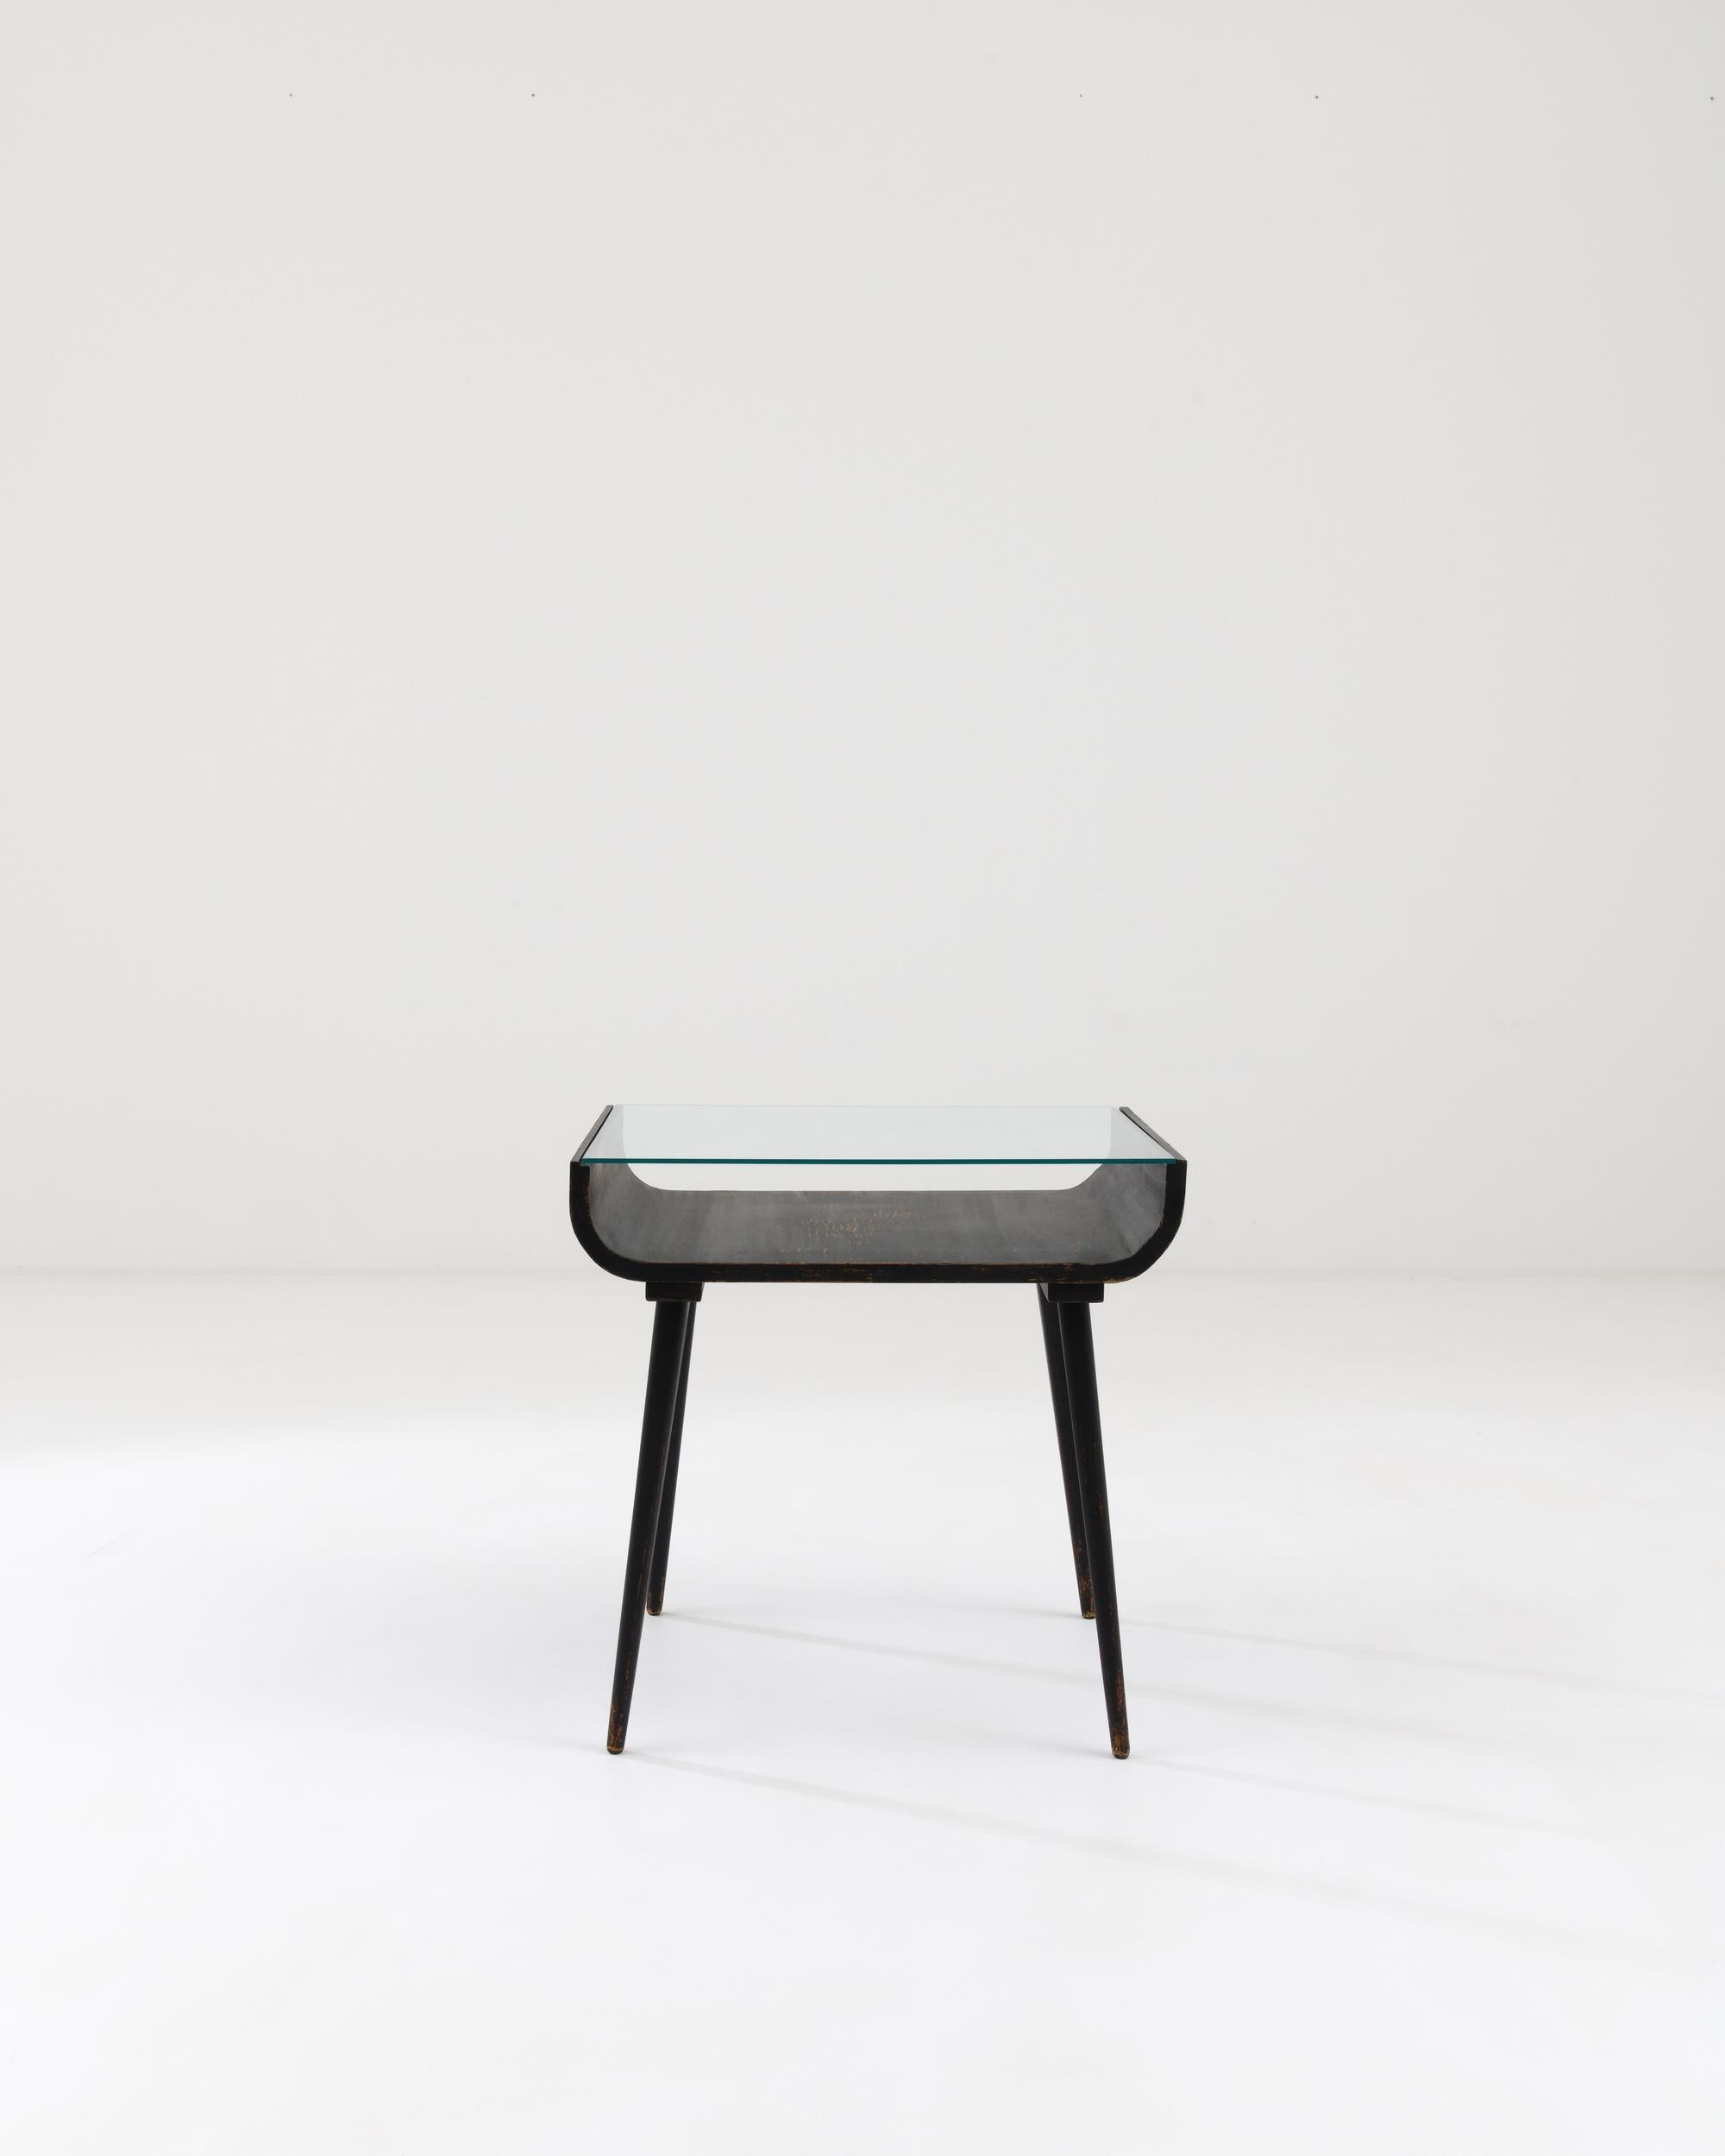 A wooden side table with a glass top made in mid-20th century Czechia. Typical of mid-century Central European design, this side table combines a forthright utility with a minimal sleekness. The wood structure, which has begun to patina throughout